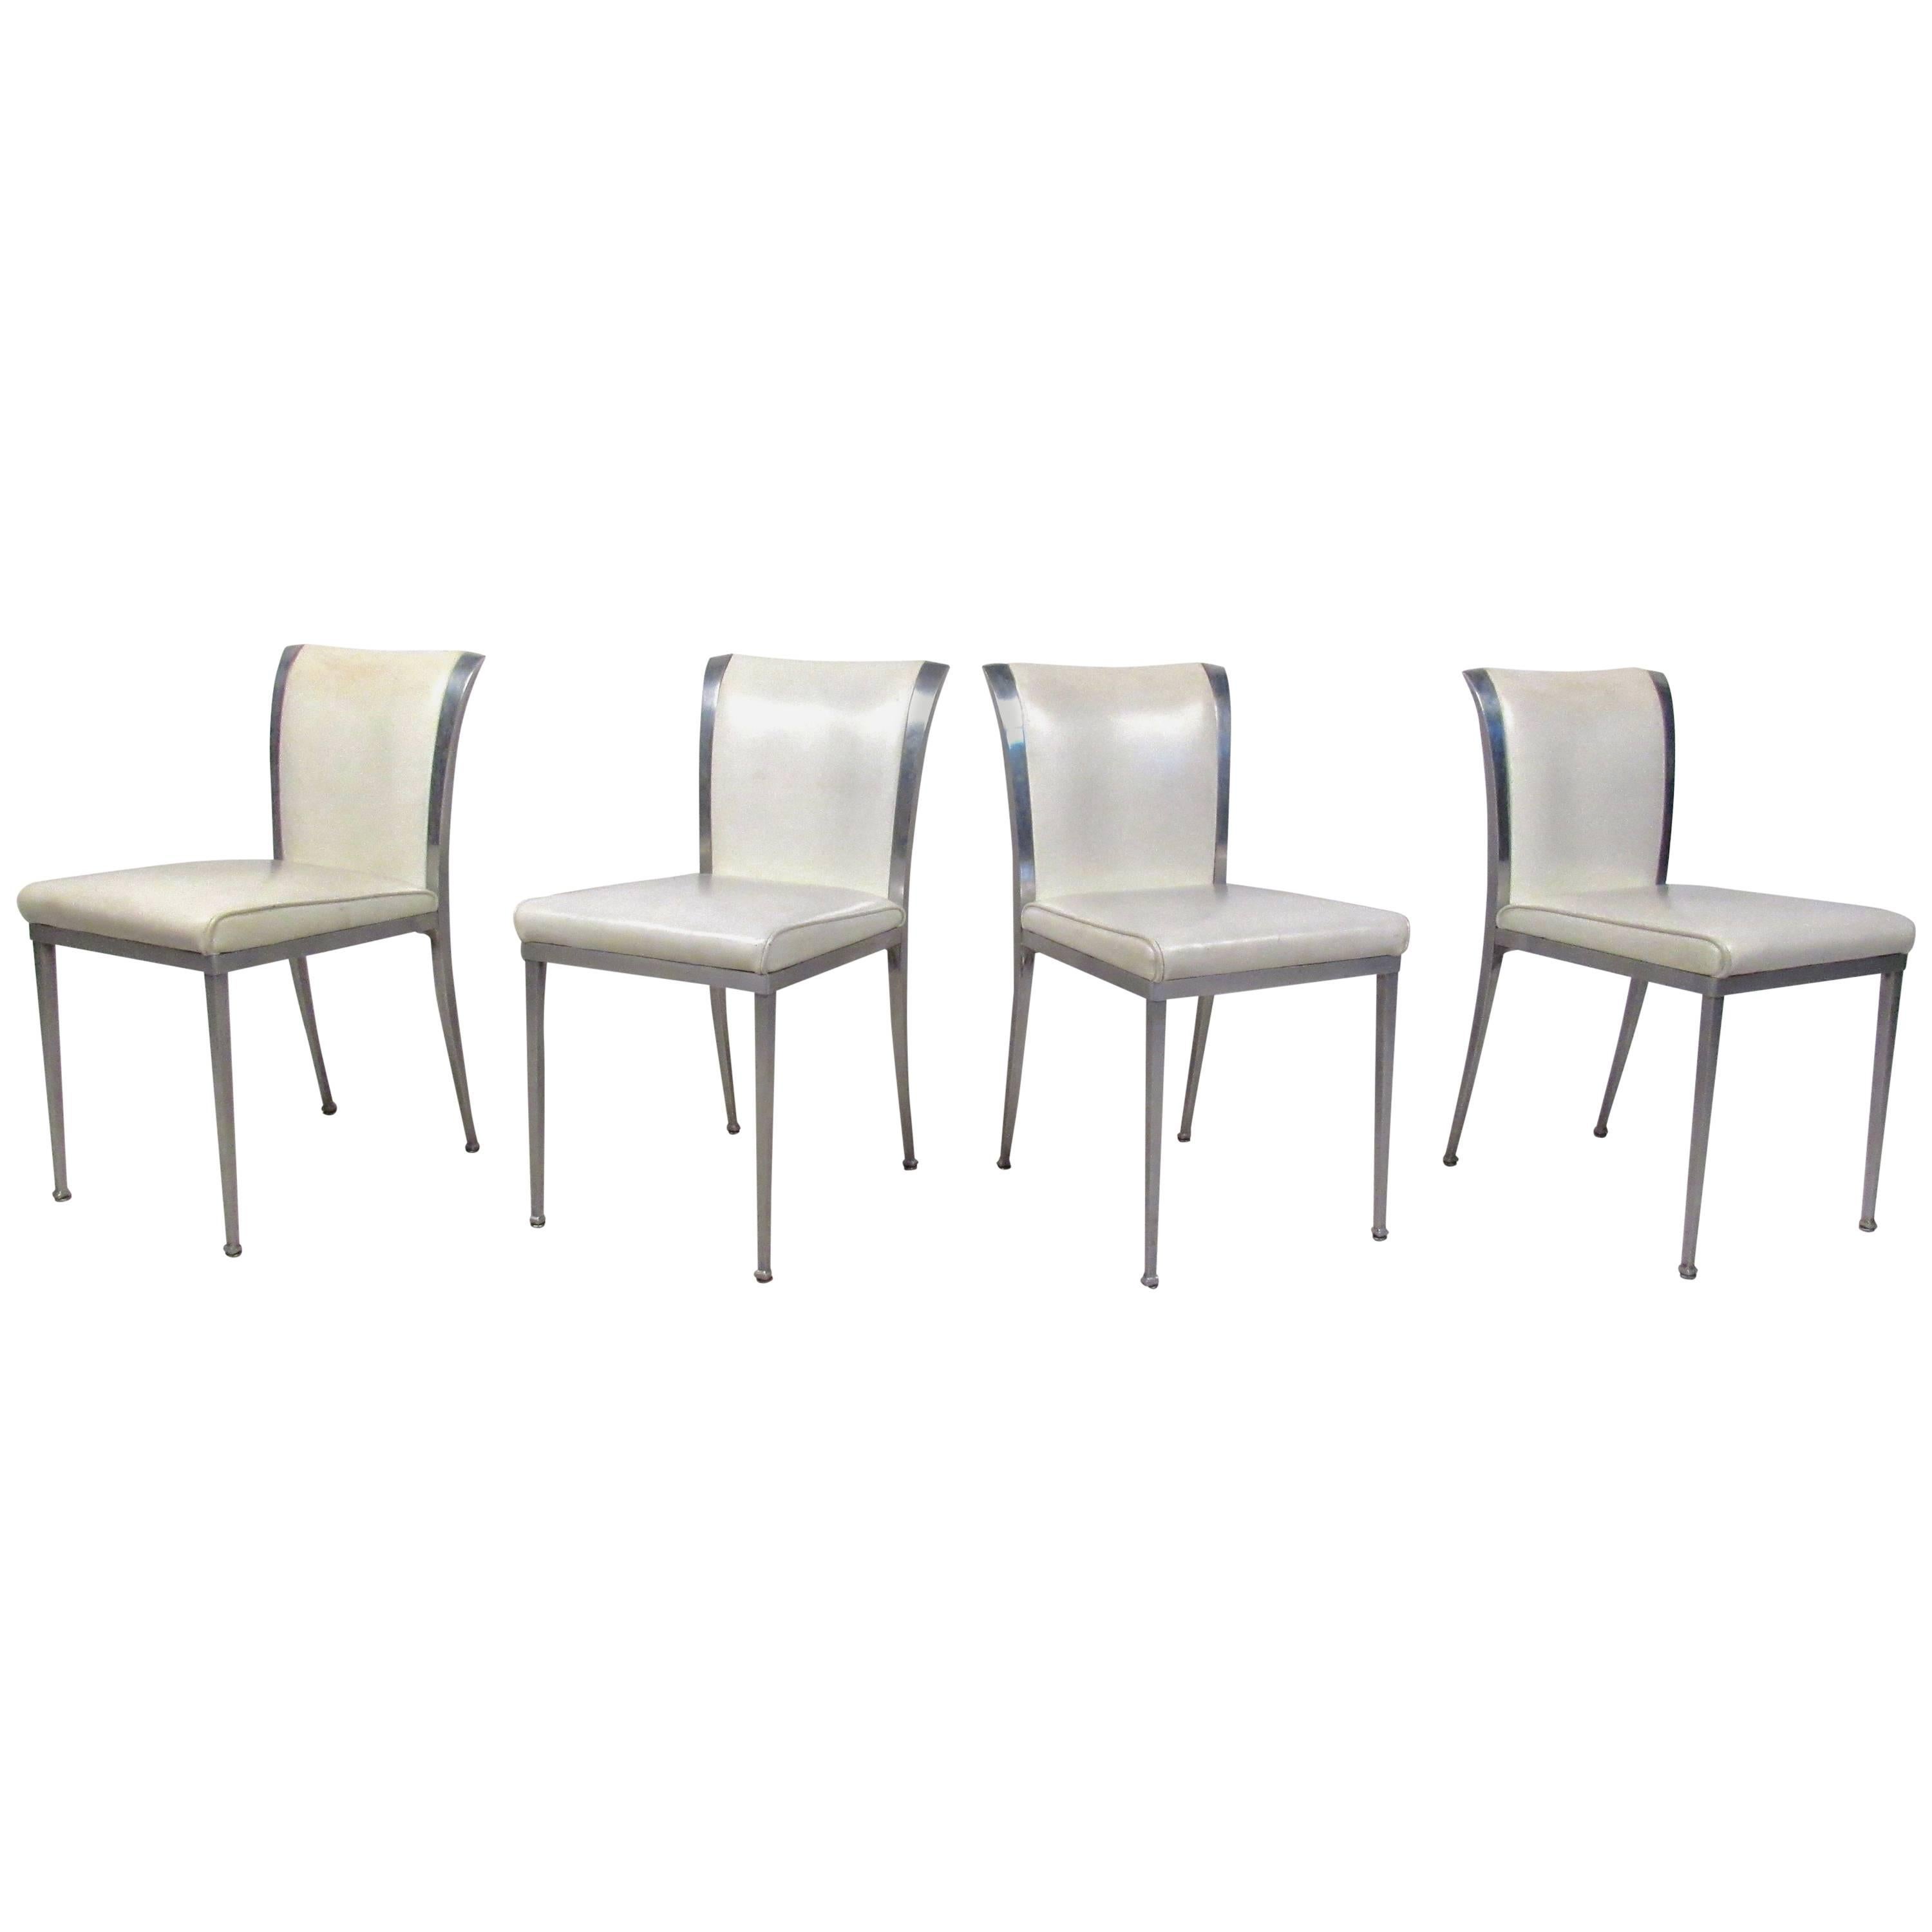 Set of Four Mid-Century Modern Dining Chairs For Sale